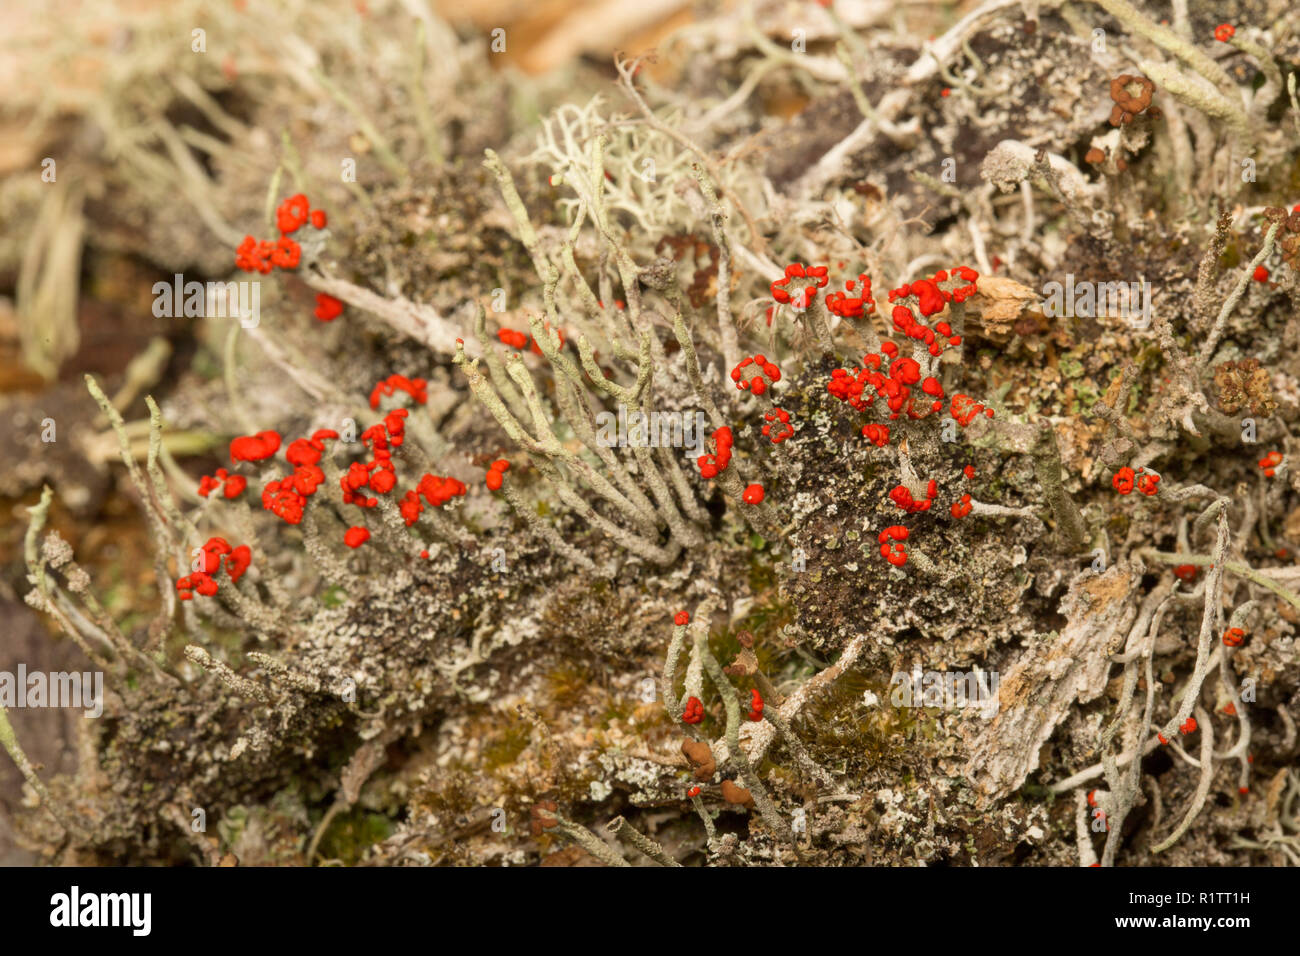 Cladonia floerkeana lichen growing on an old tree stump in coniferous, rural woodlands. Lichens are sensitive to air pollution. C. floerkeana is an ex Stock Photo